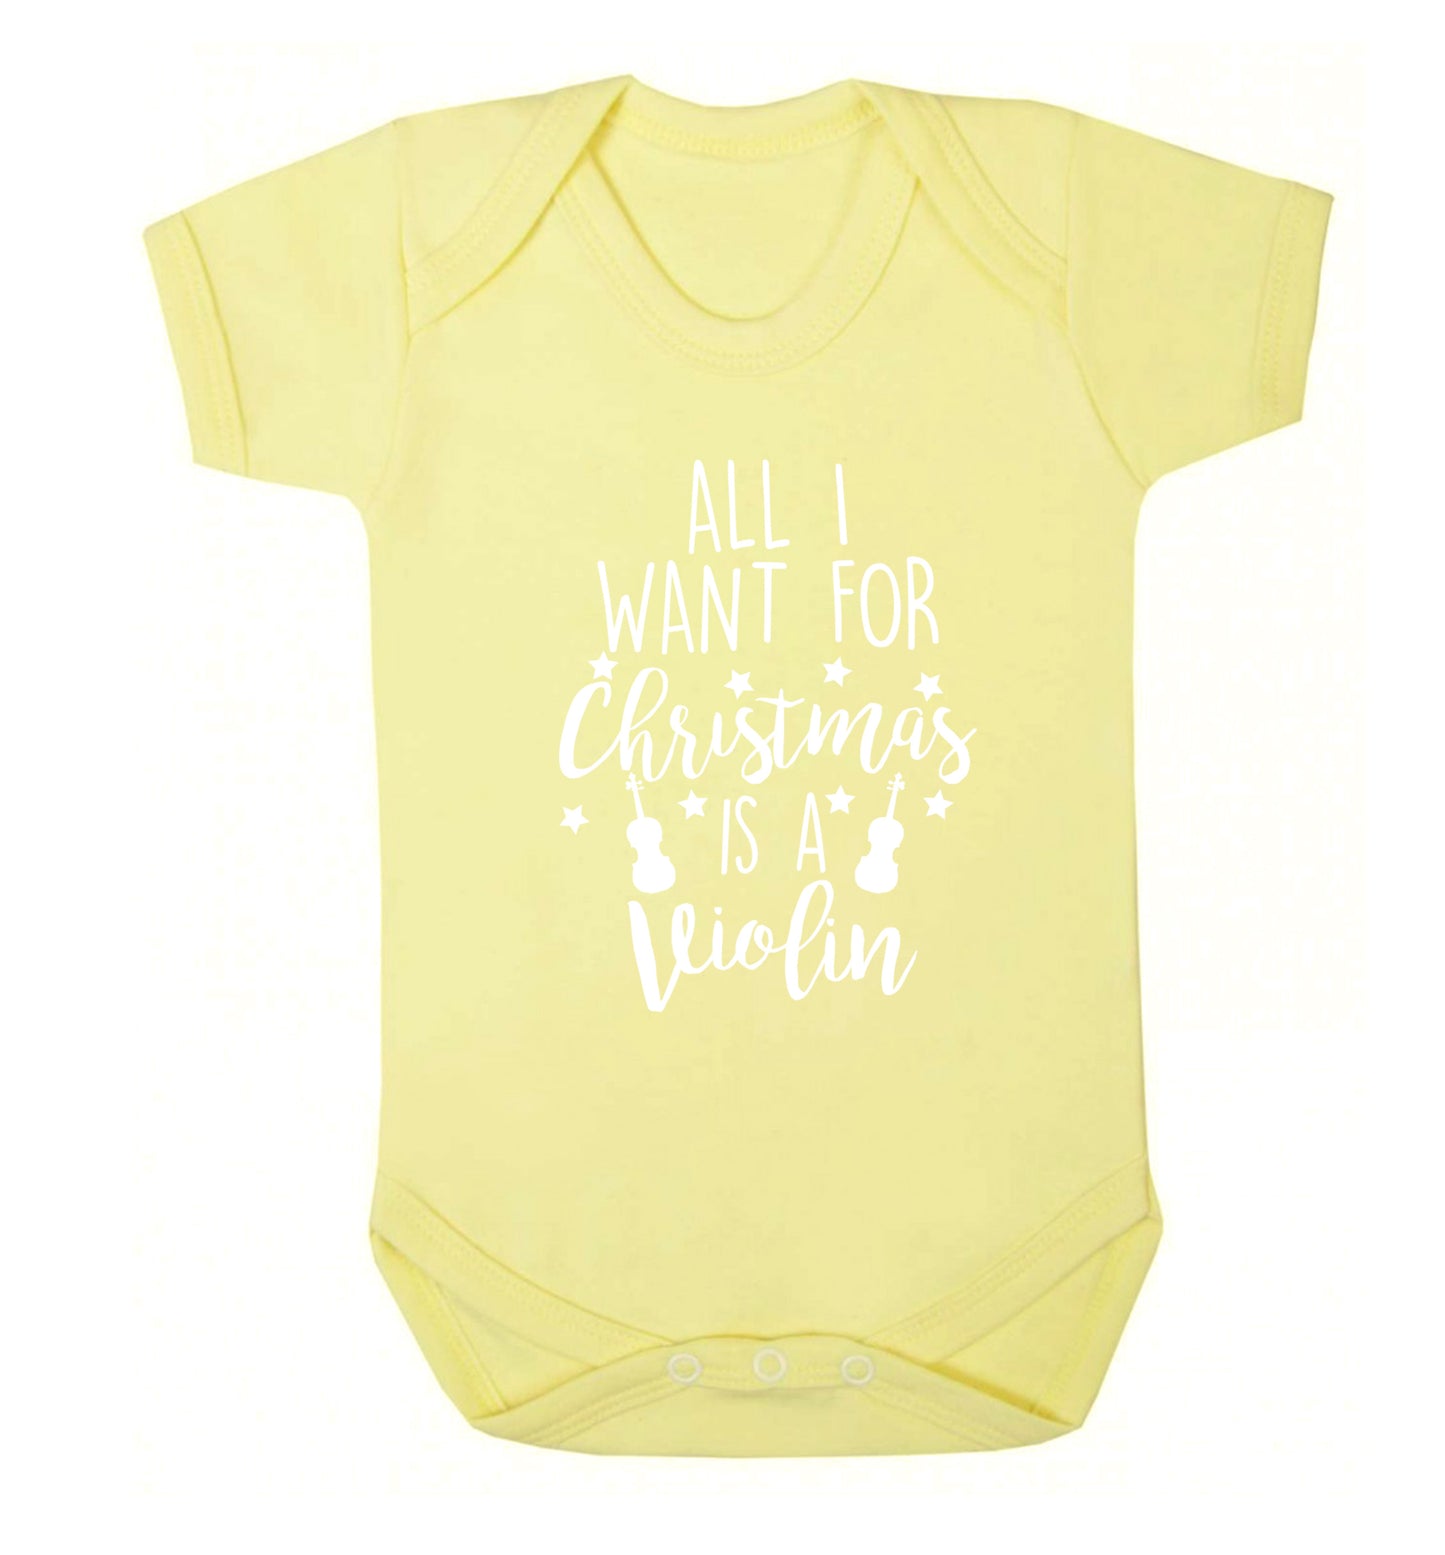 All I Want For Christmas is a Violin Baby Vest pale yellow 18-24 months